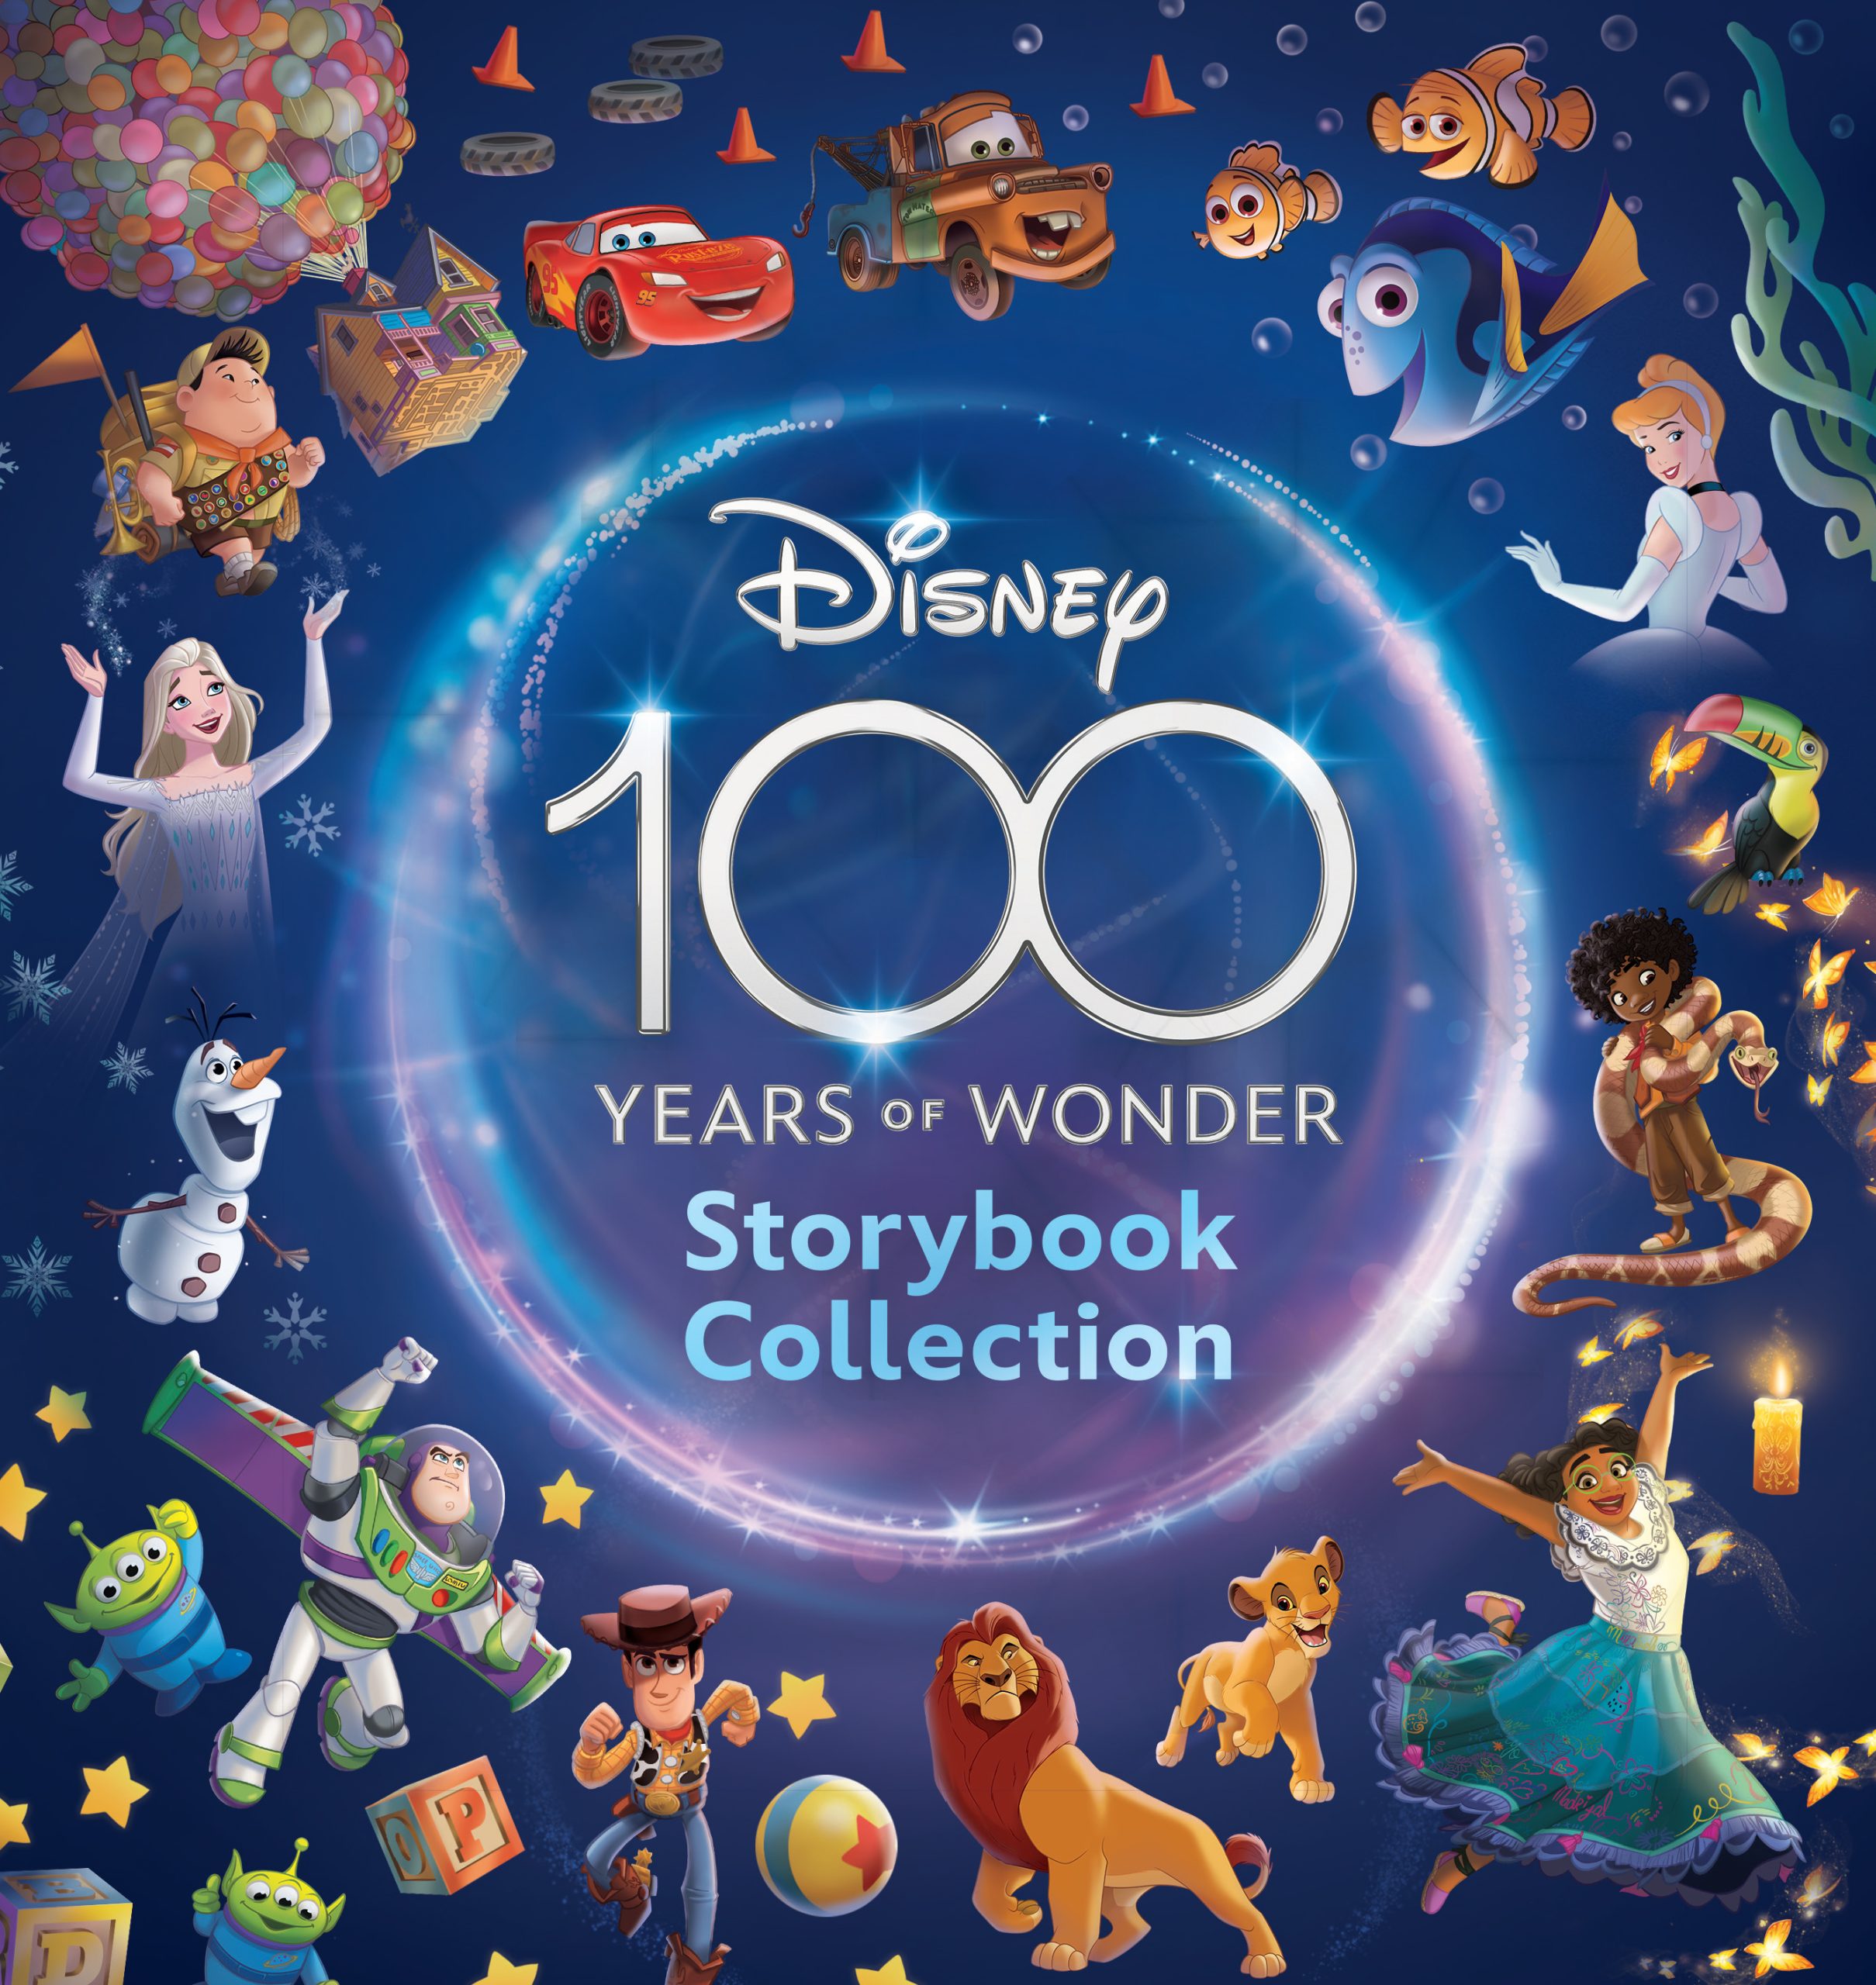 Disney 100 Years of Wonder Storybook Collection by Victoria Saxon